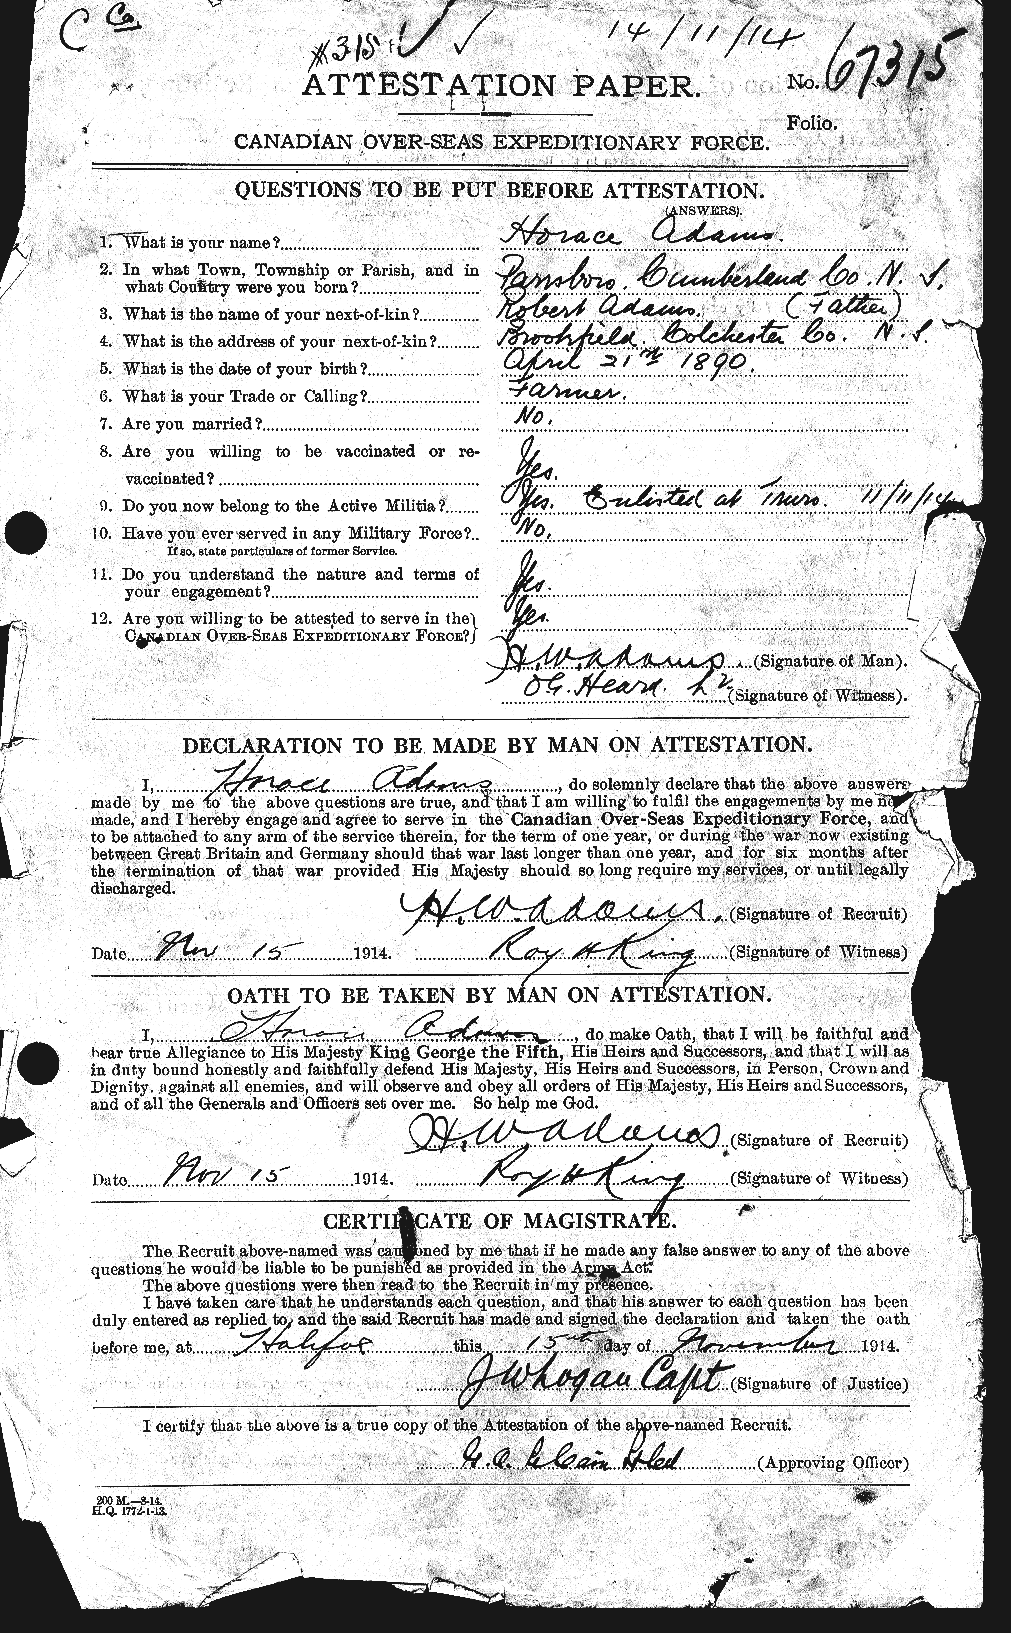 Personnel Records of the First World War - CEF 203204a